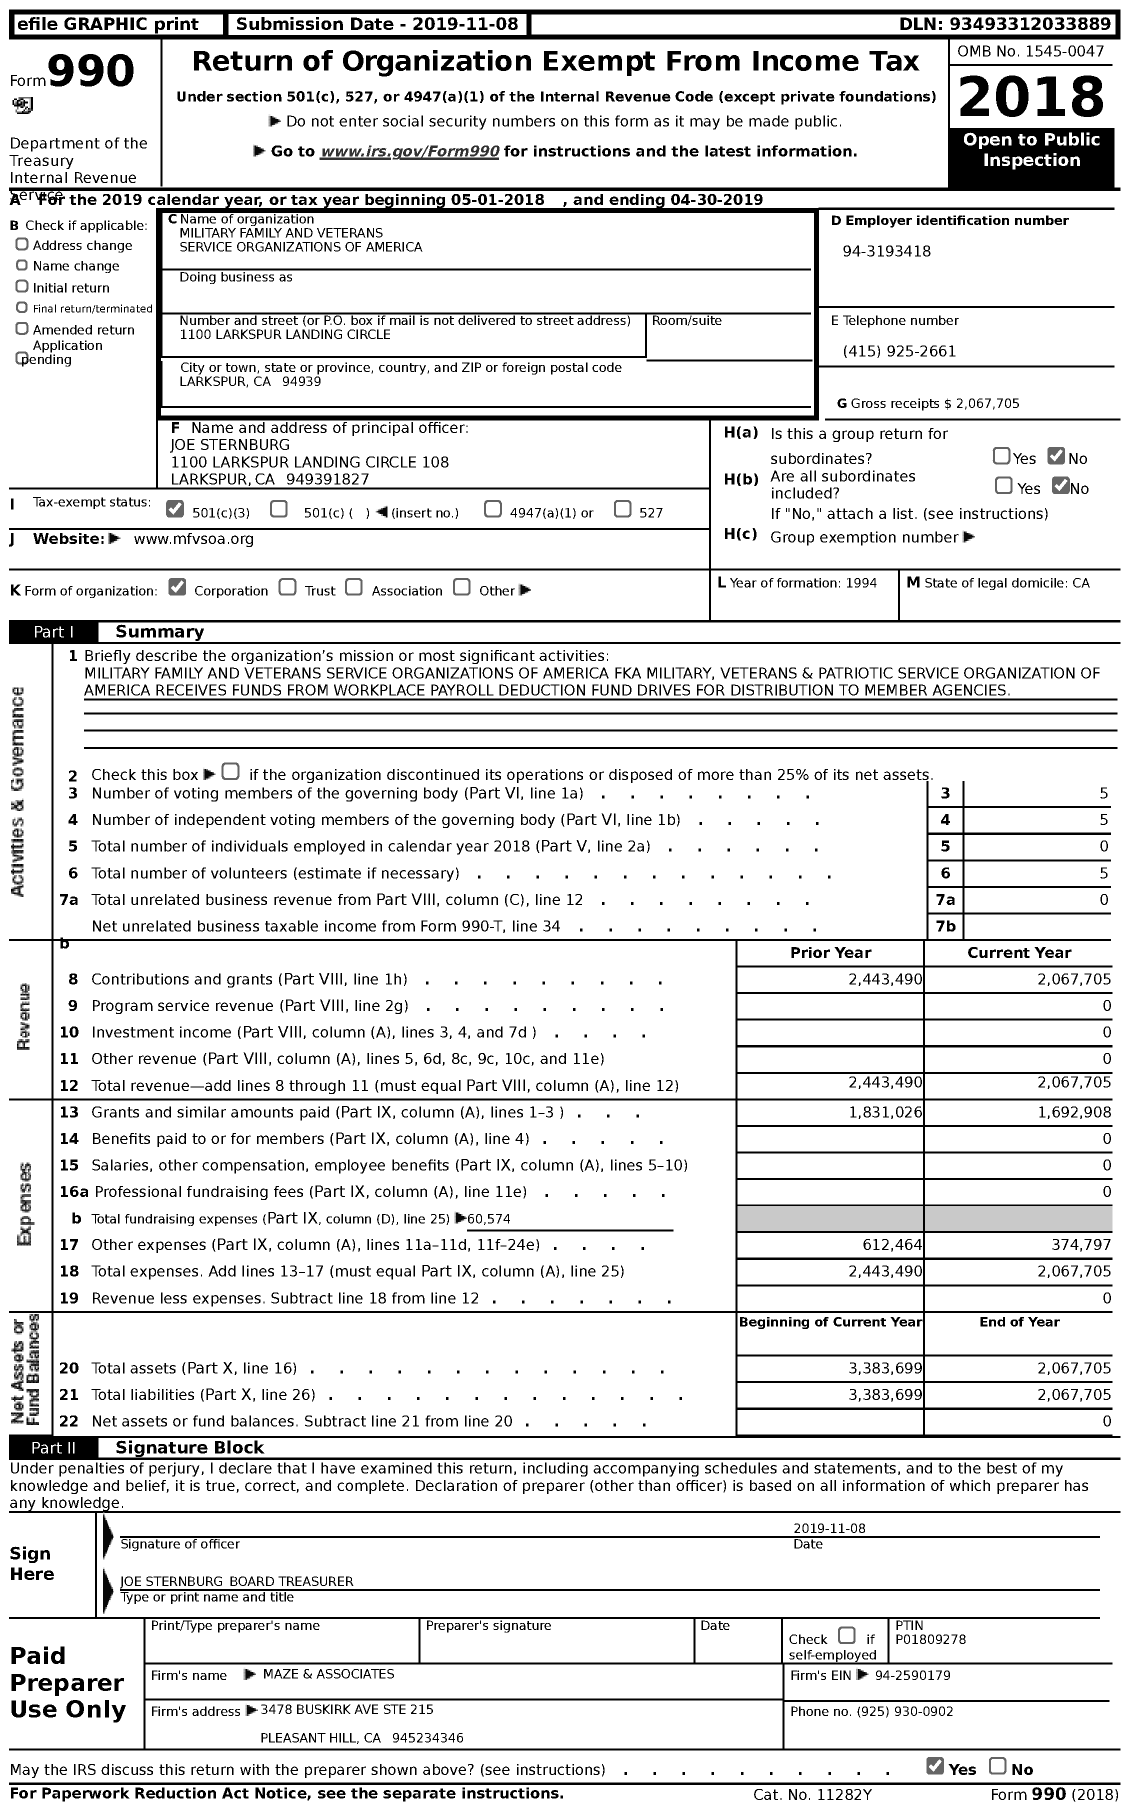 Image of first page of 2018 Form 990 for Military Family and Veterans Service Organizations of America (MFVSOA)